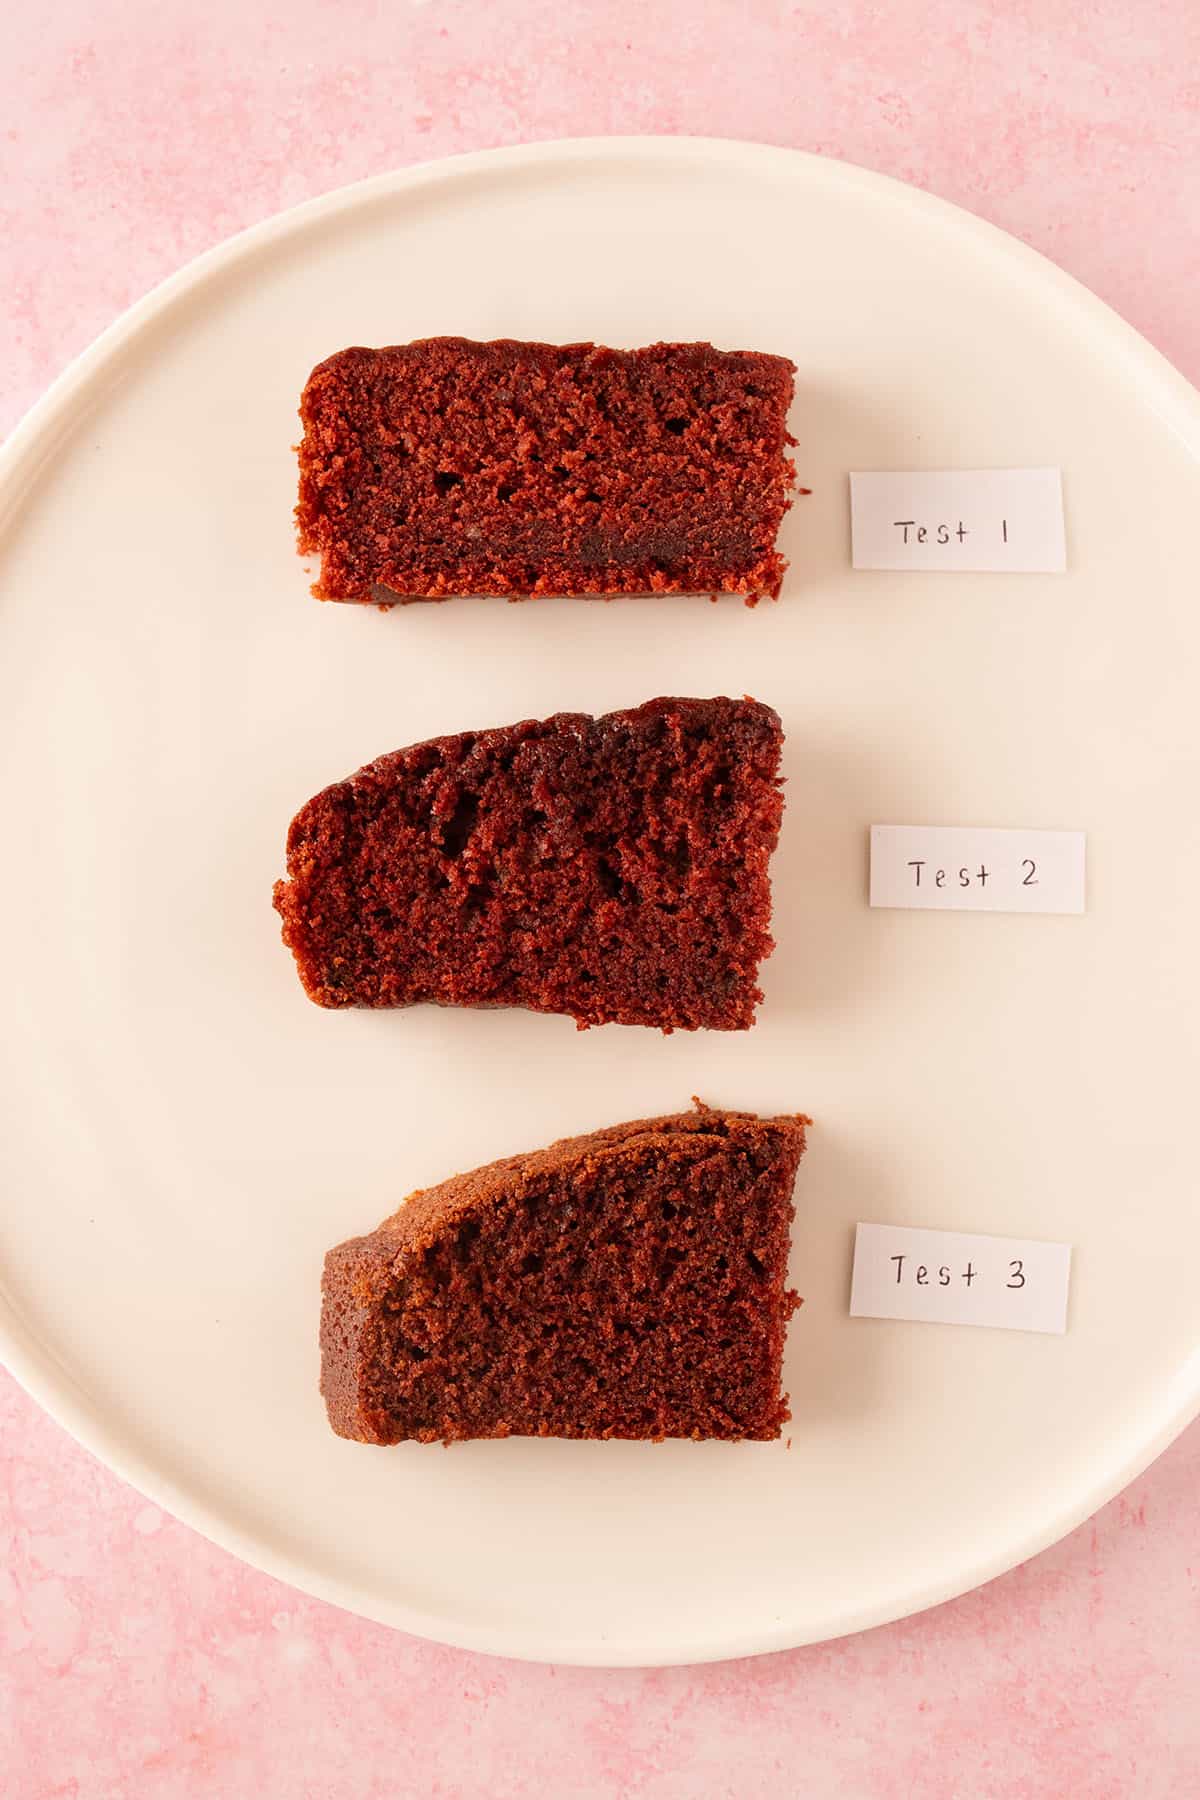 Three different slices of red velvet cake showing the recipe testing process.